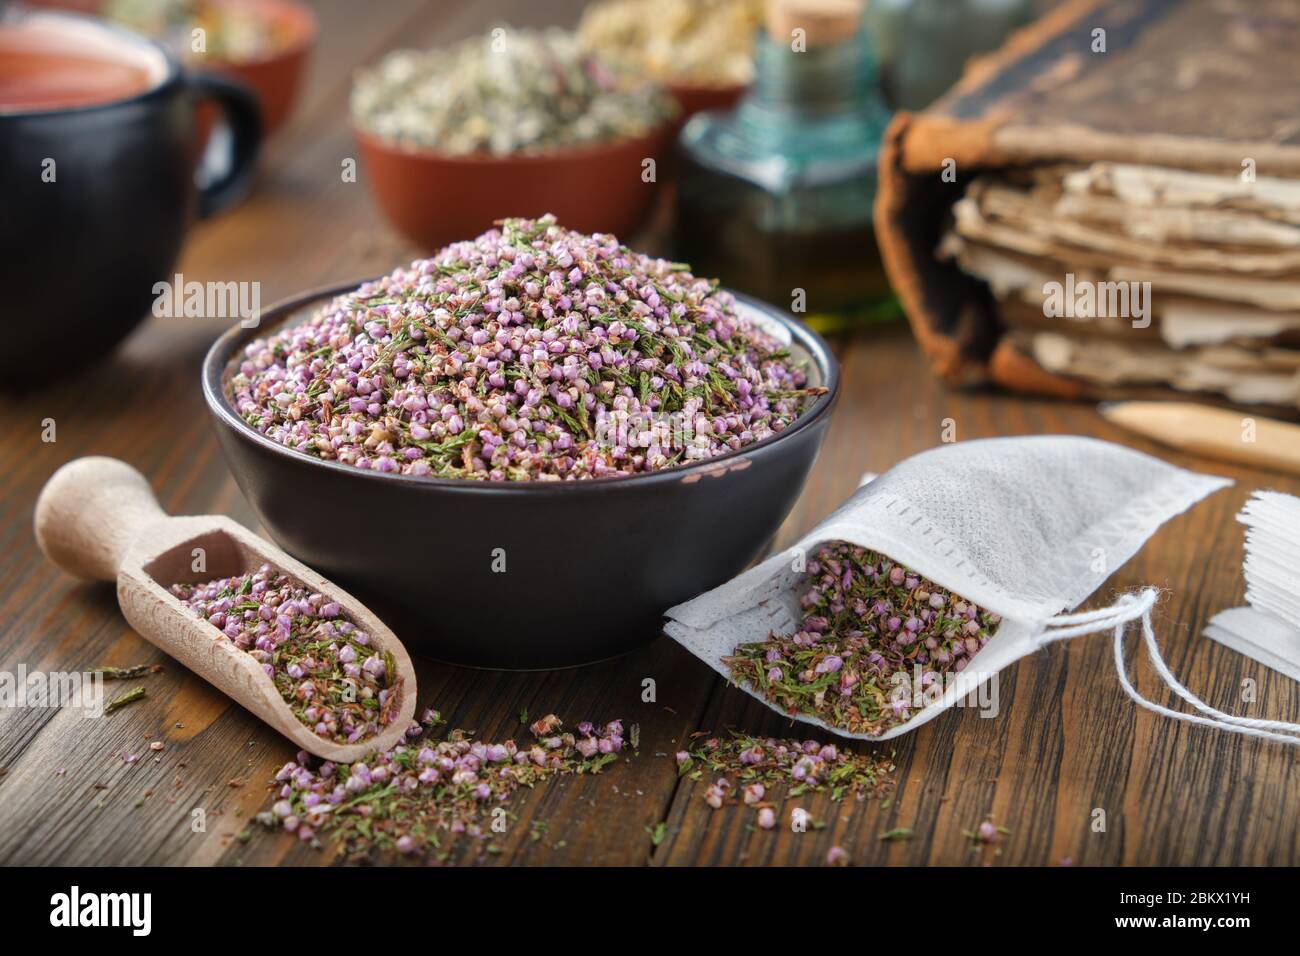 Bowl of dry healthy heather, tea bag with Erica flowers inside. Tea cup, infusion bottle and books on background. Stock Photo